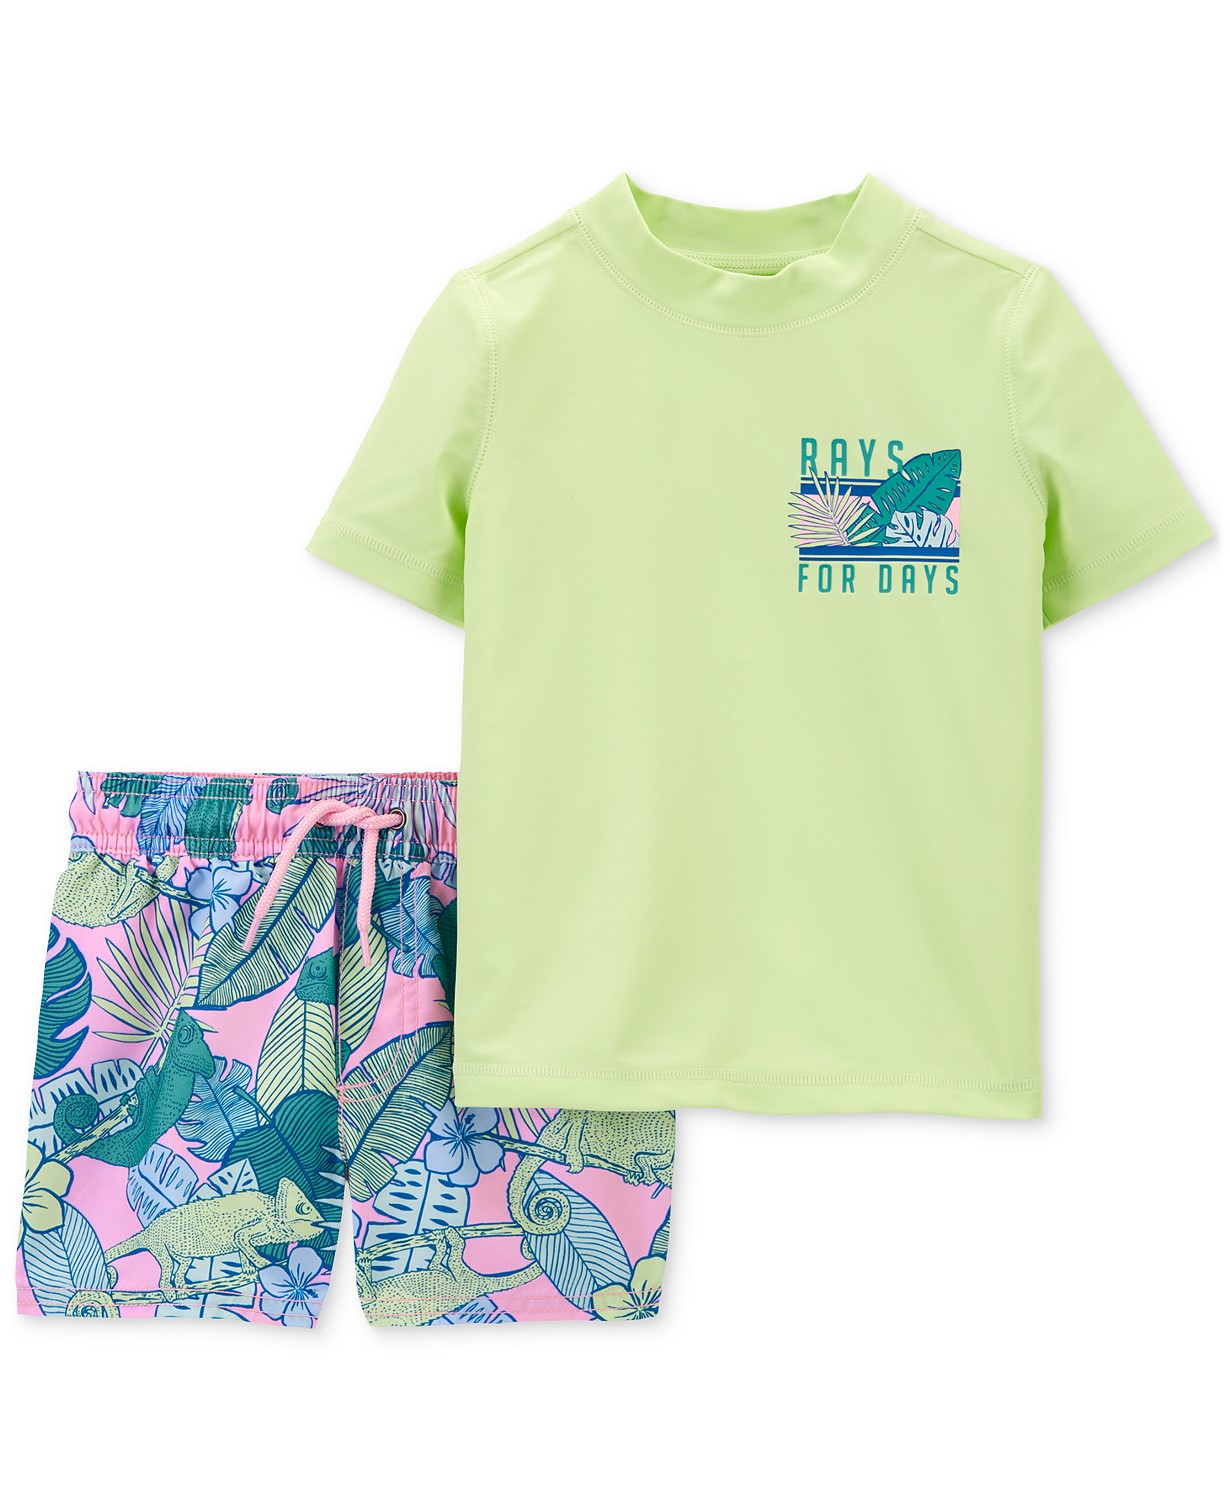 Toddler Boys Rays for Days Rash Guard Top and Tropical-Print Swim Shorts 2 Piece Set